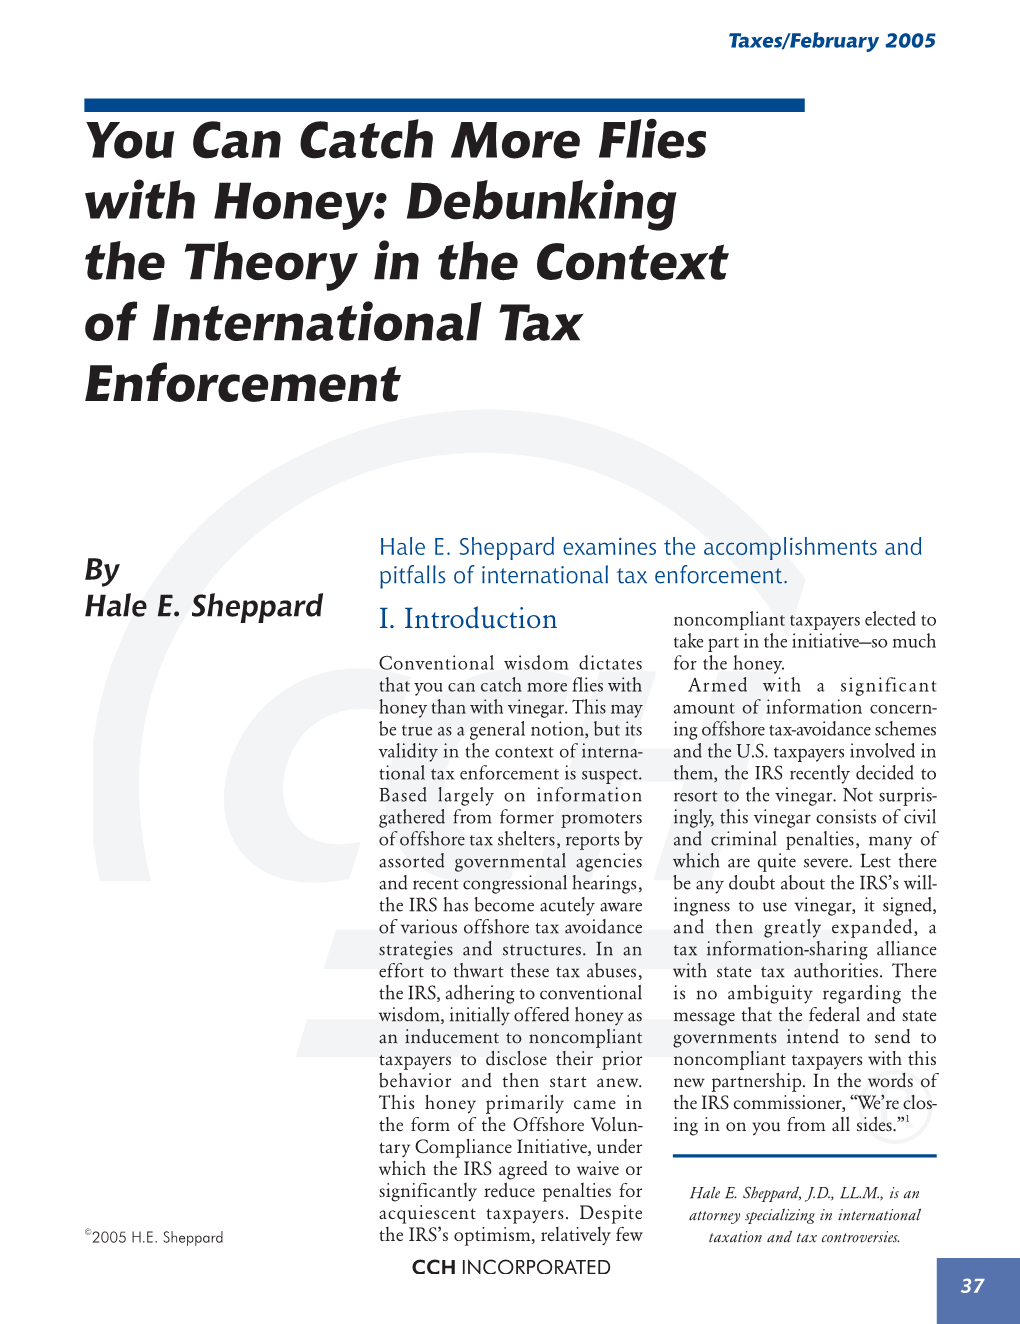 Debunking the Theory in the Context of International Tax Enforcement